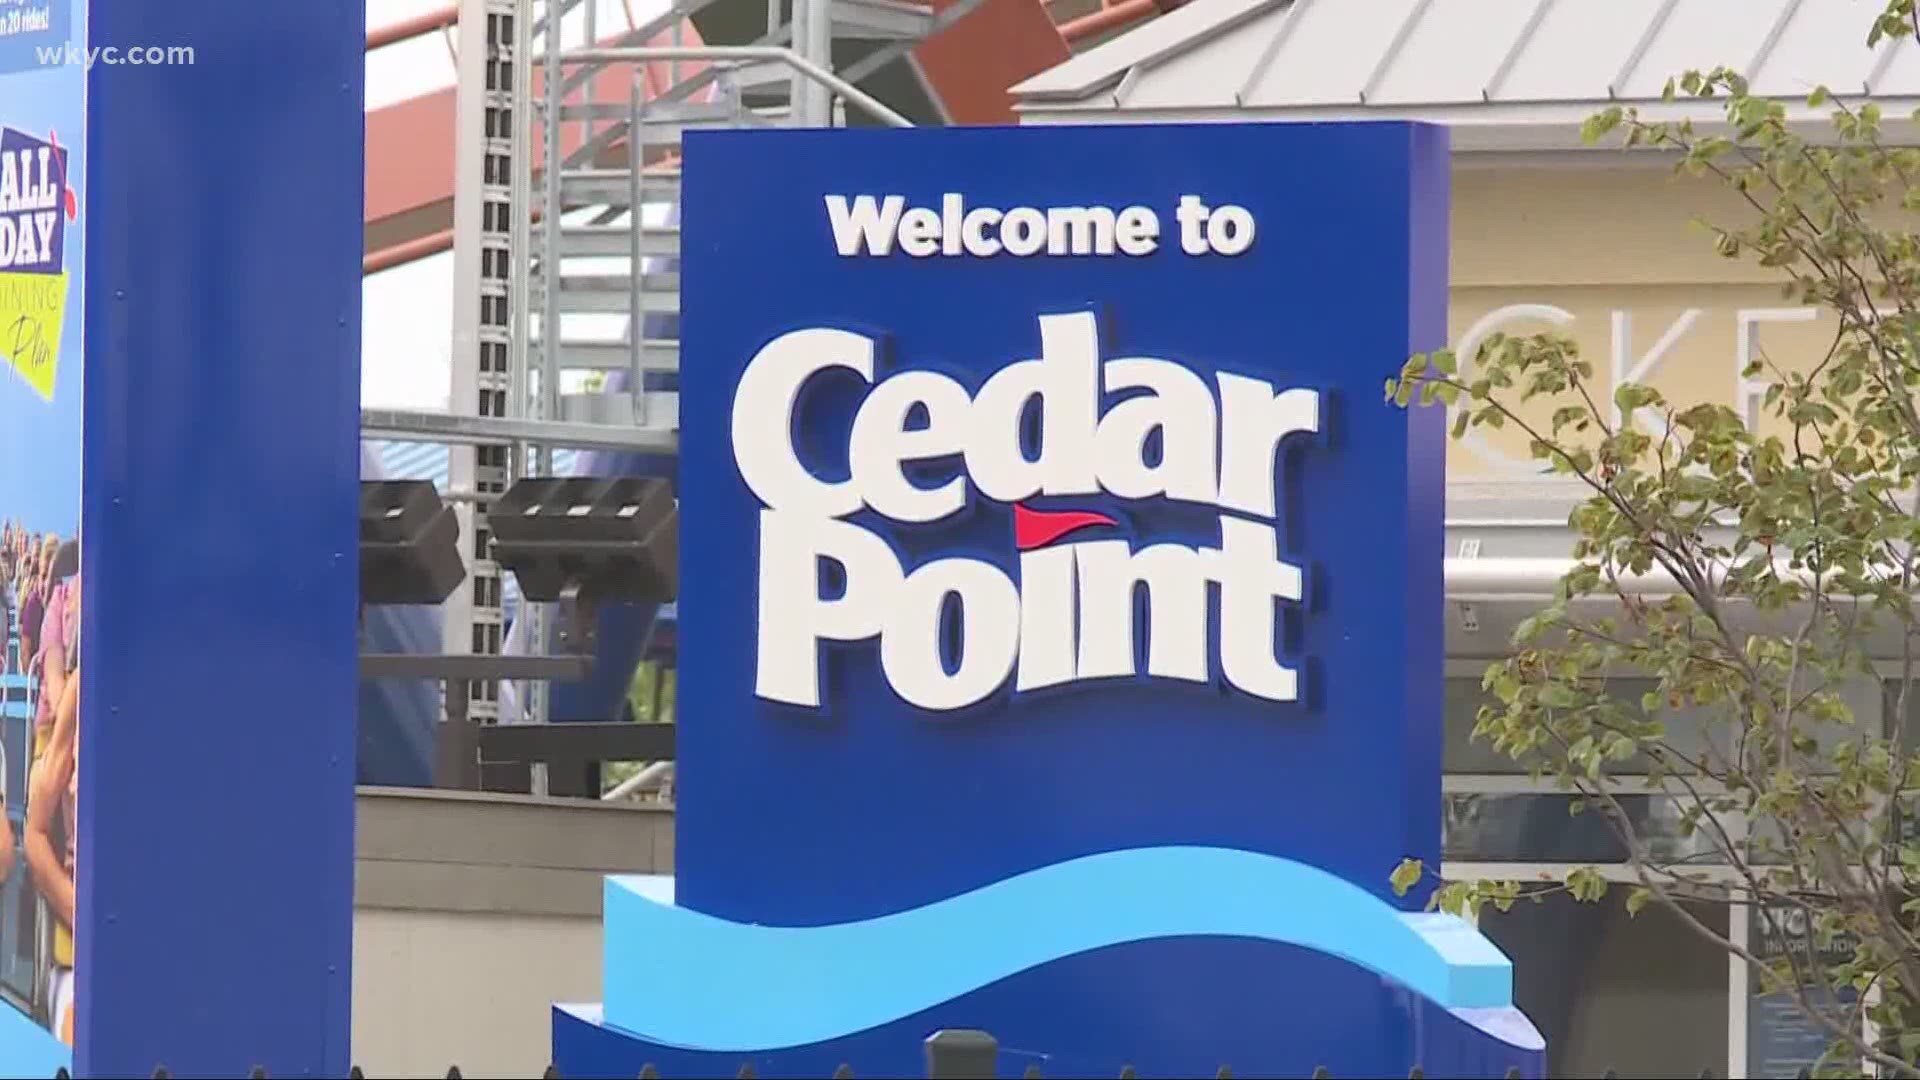 Three Cedar Point employees have tested positive for COVID-19. The park confirmed the cases and said they were screened before the park reopened last week.